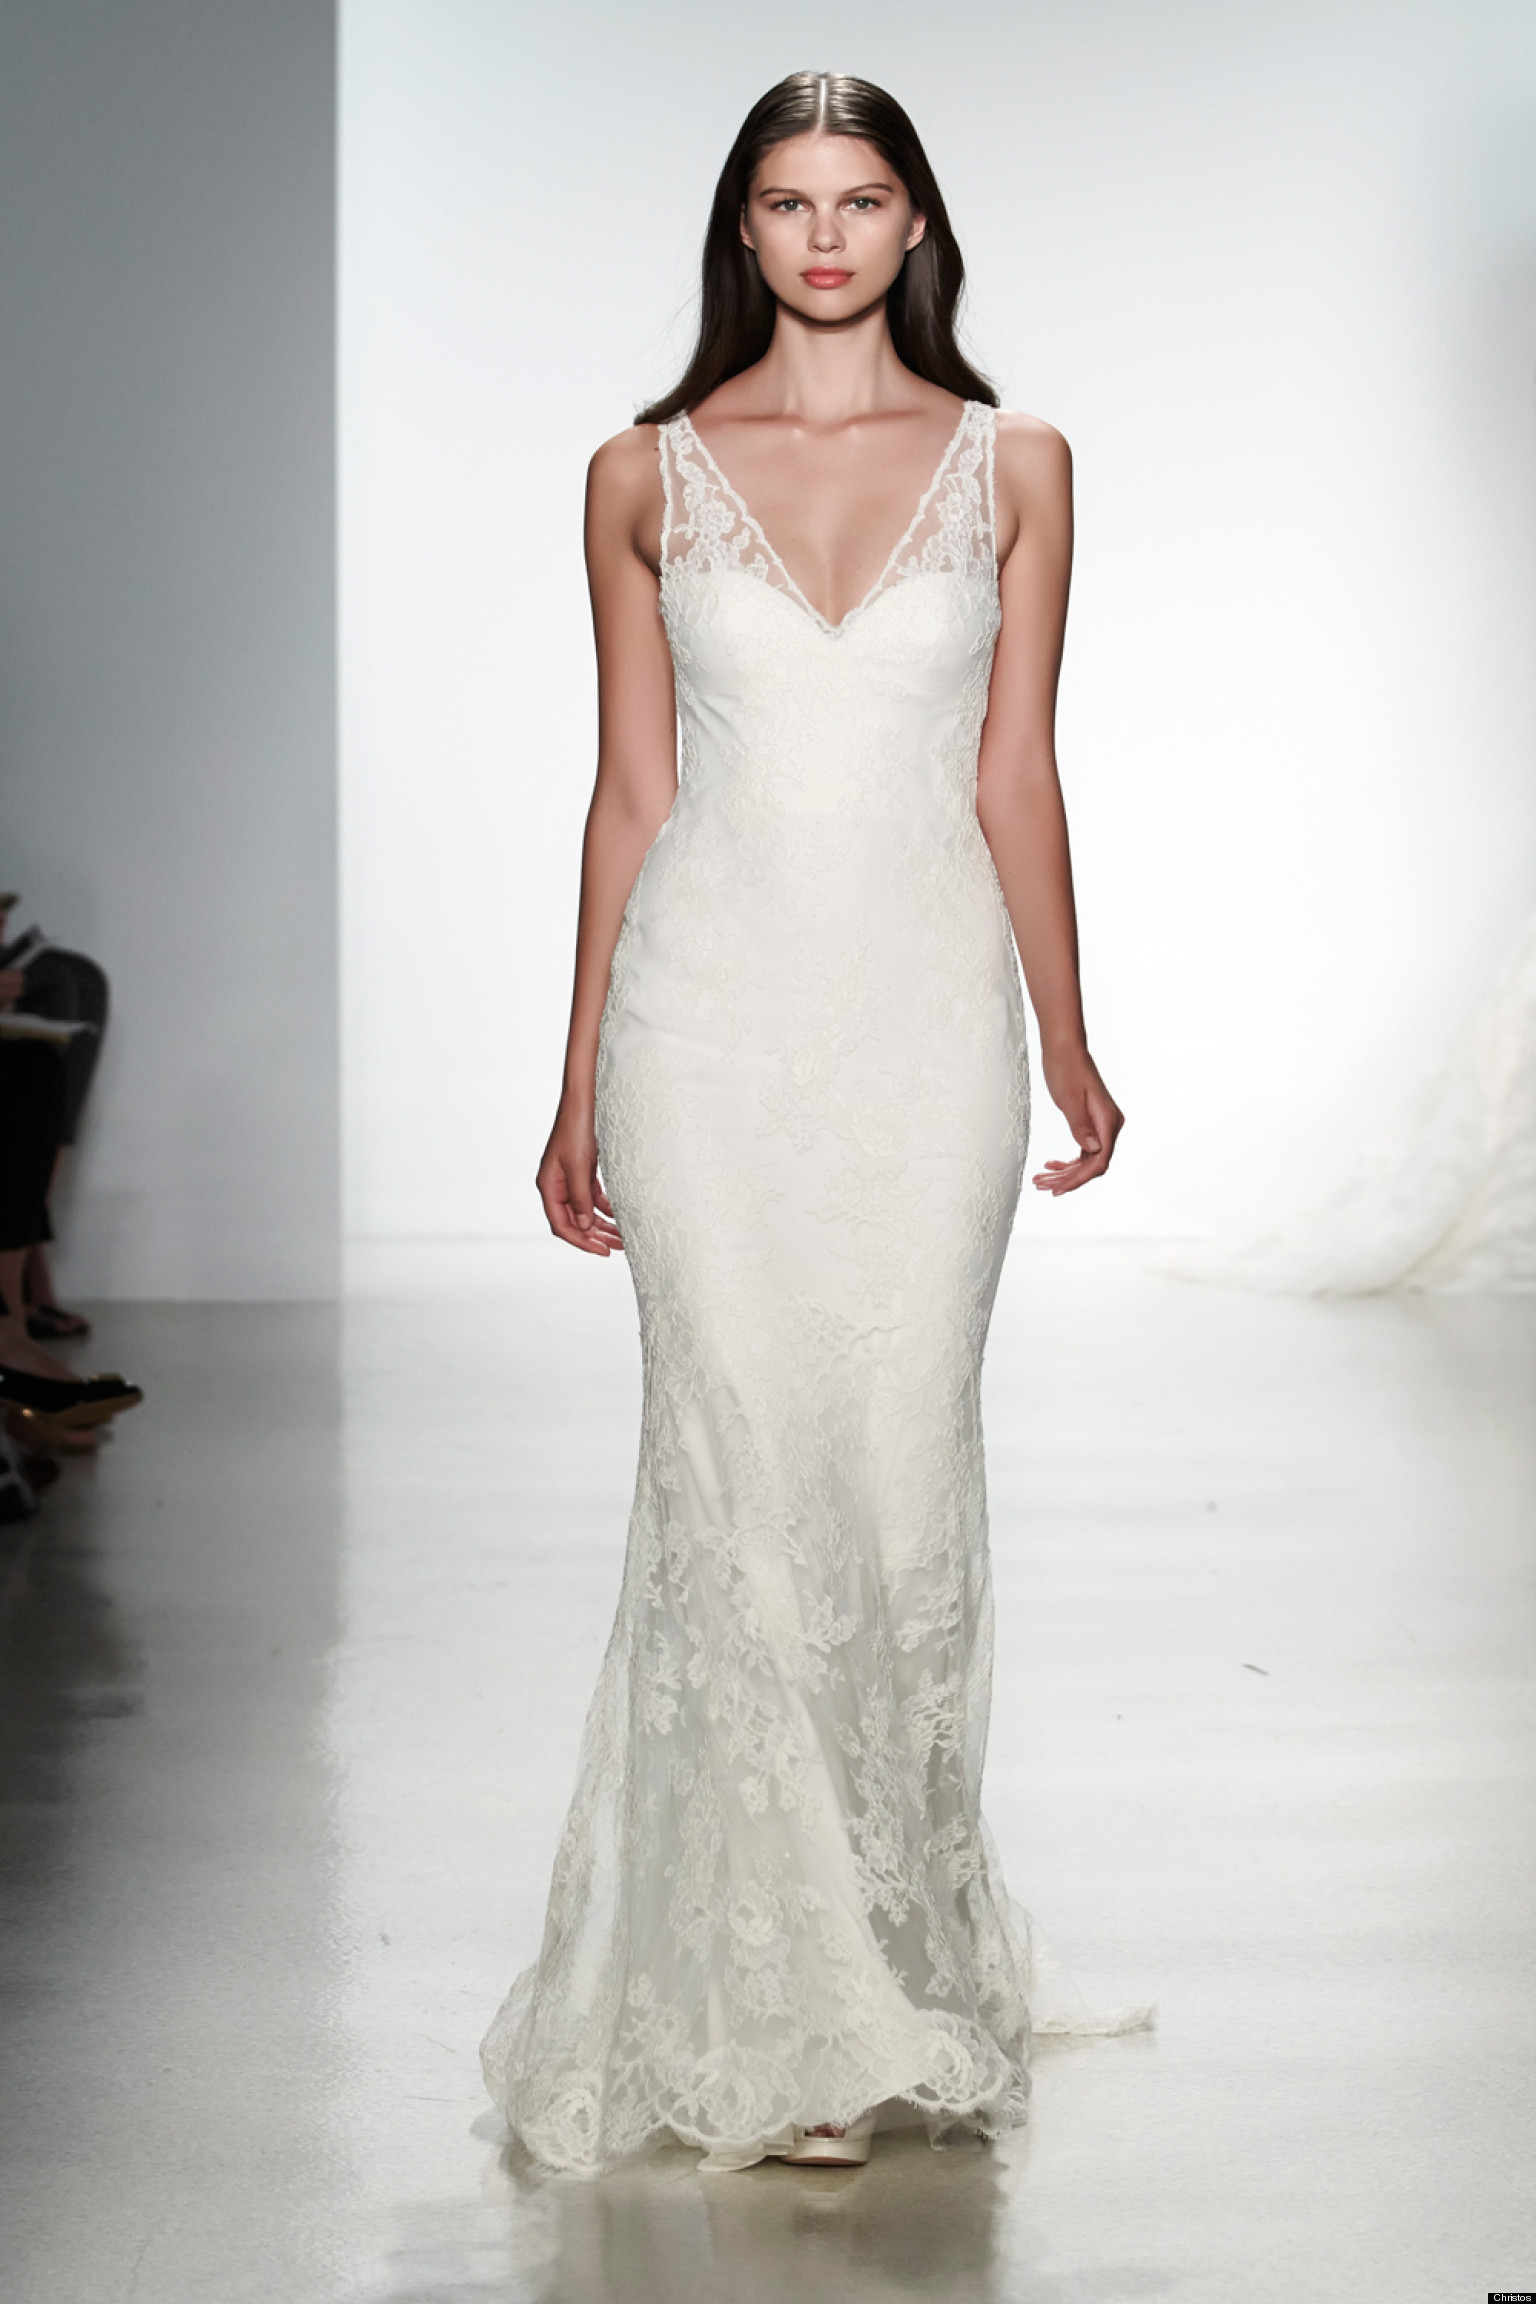 Choosing the Best Wedding Gown for Your Body Type  HuffPost